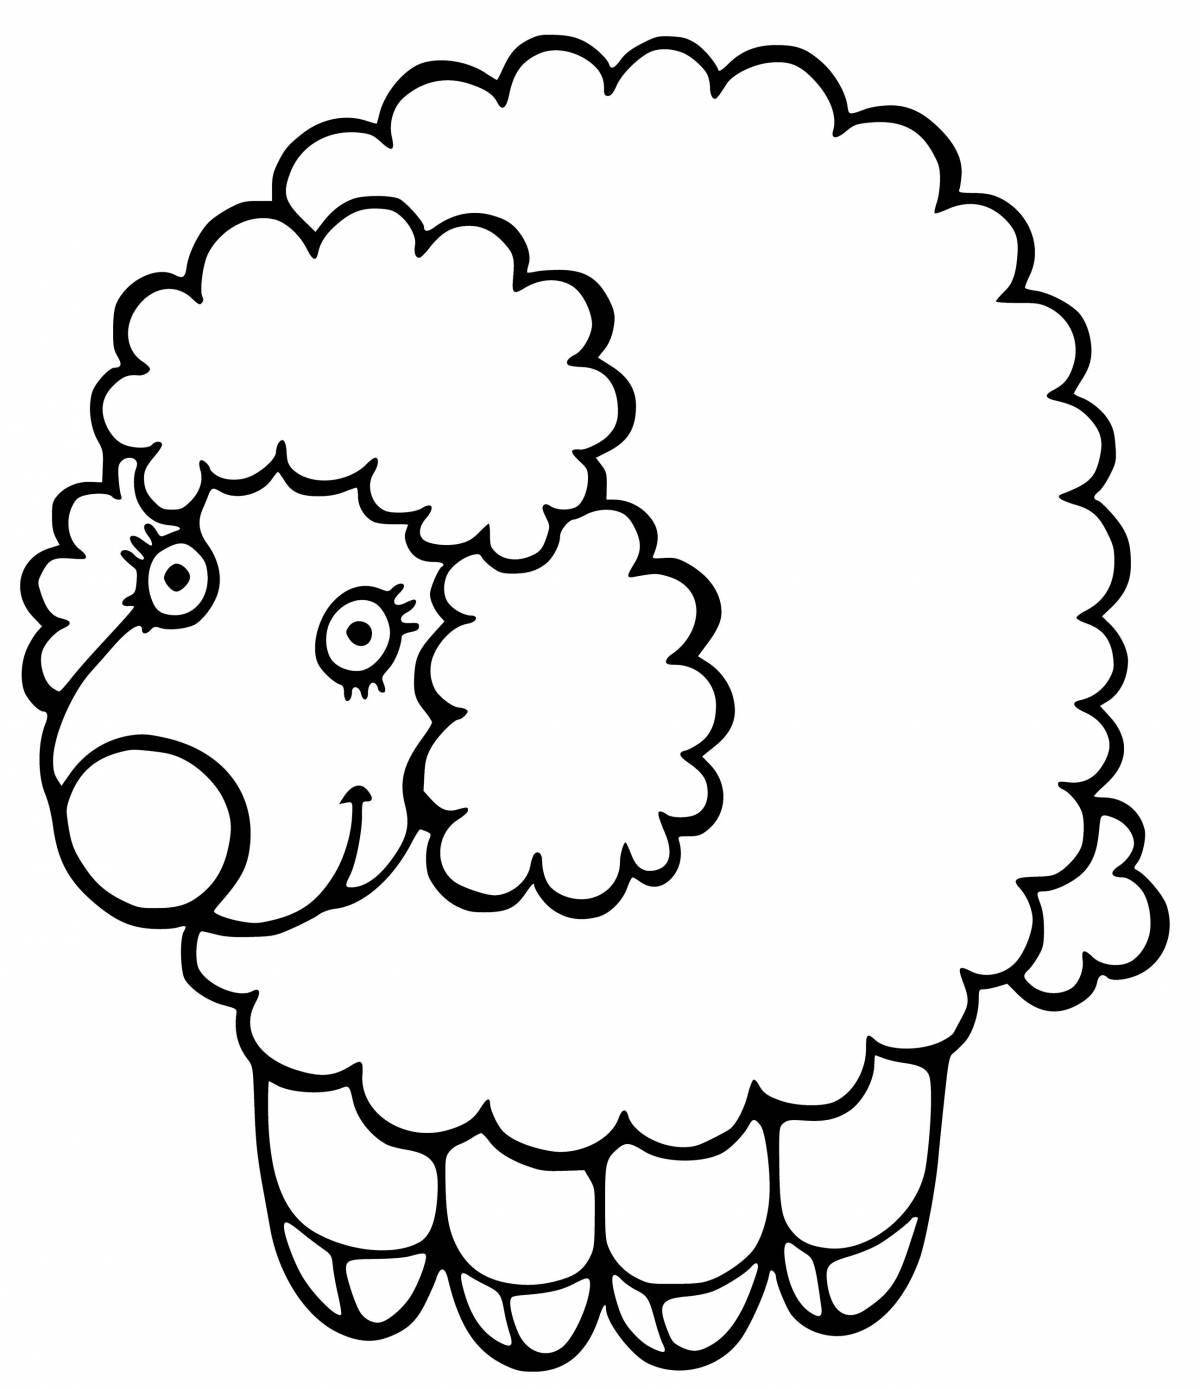 Live coloring lamb for children 3-4 years old